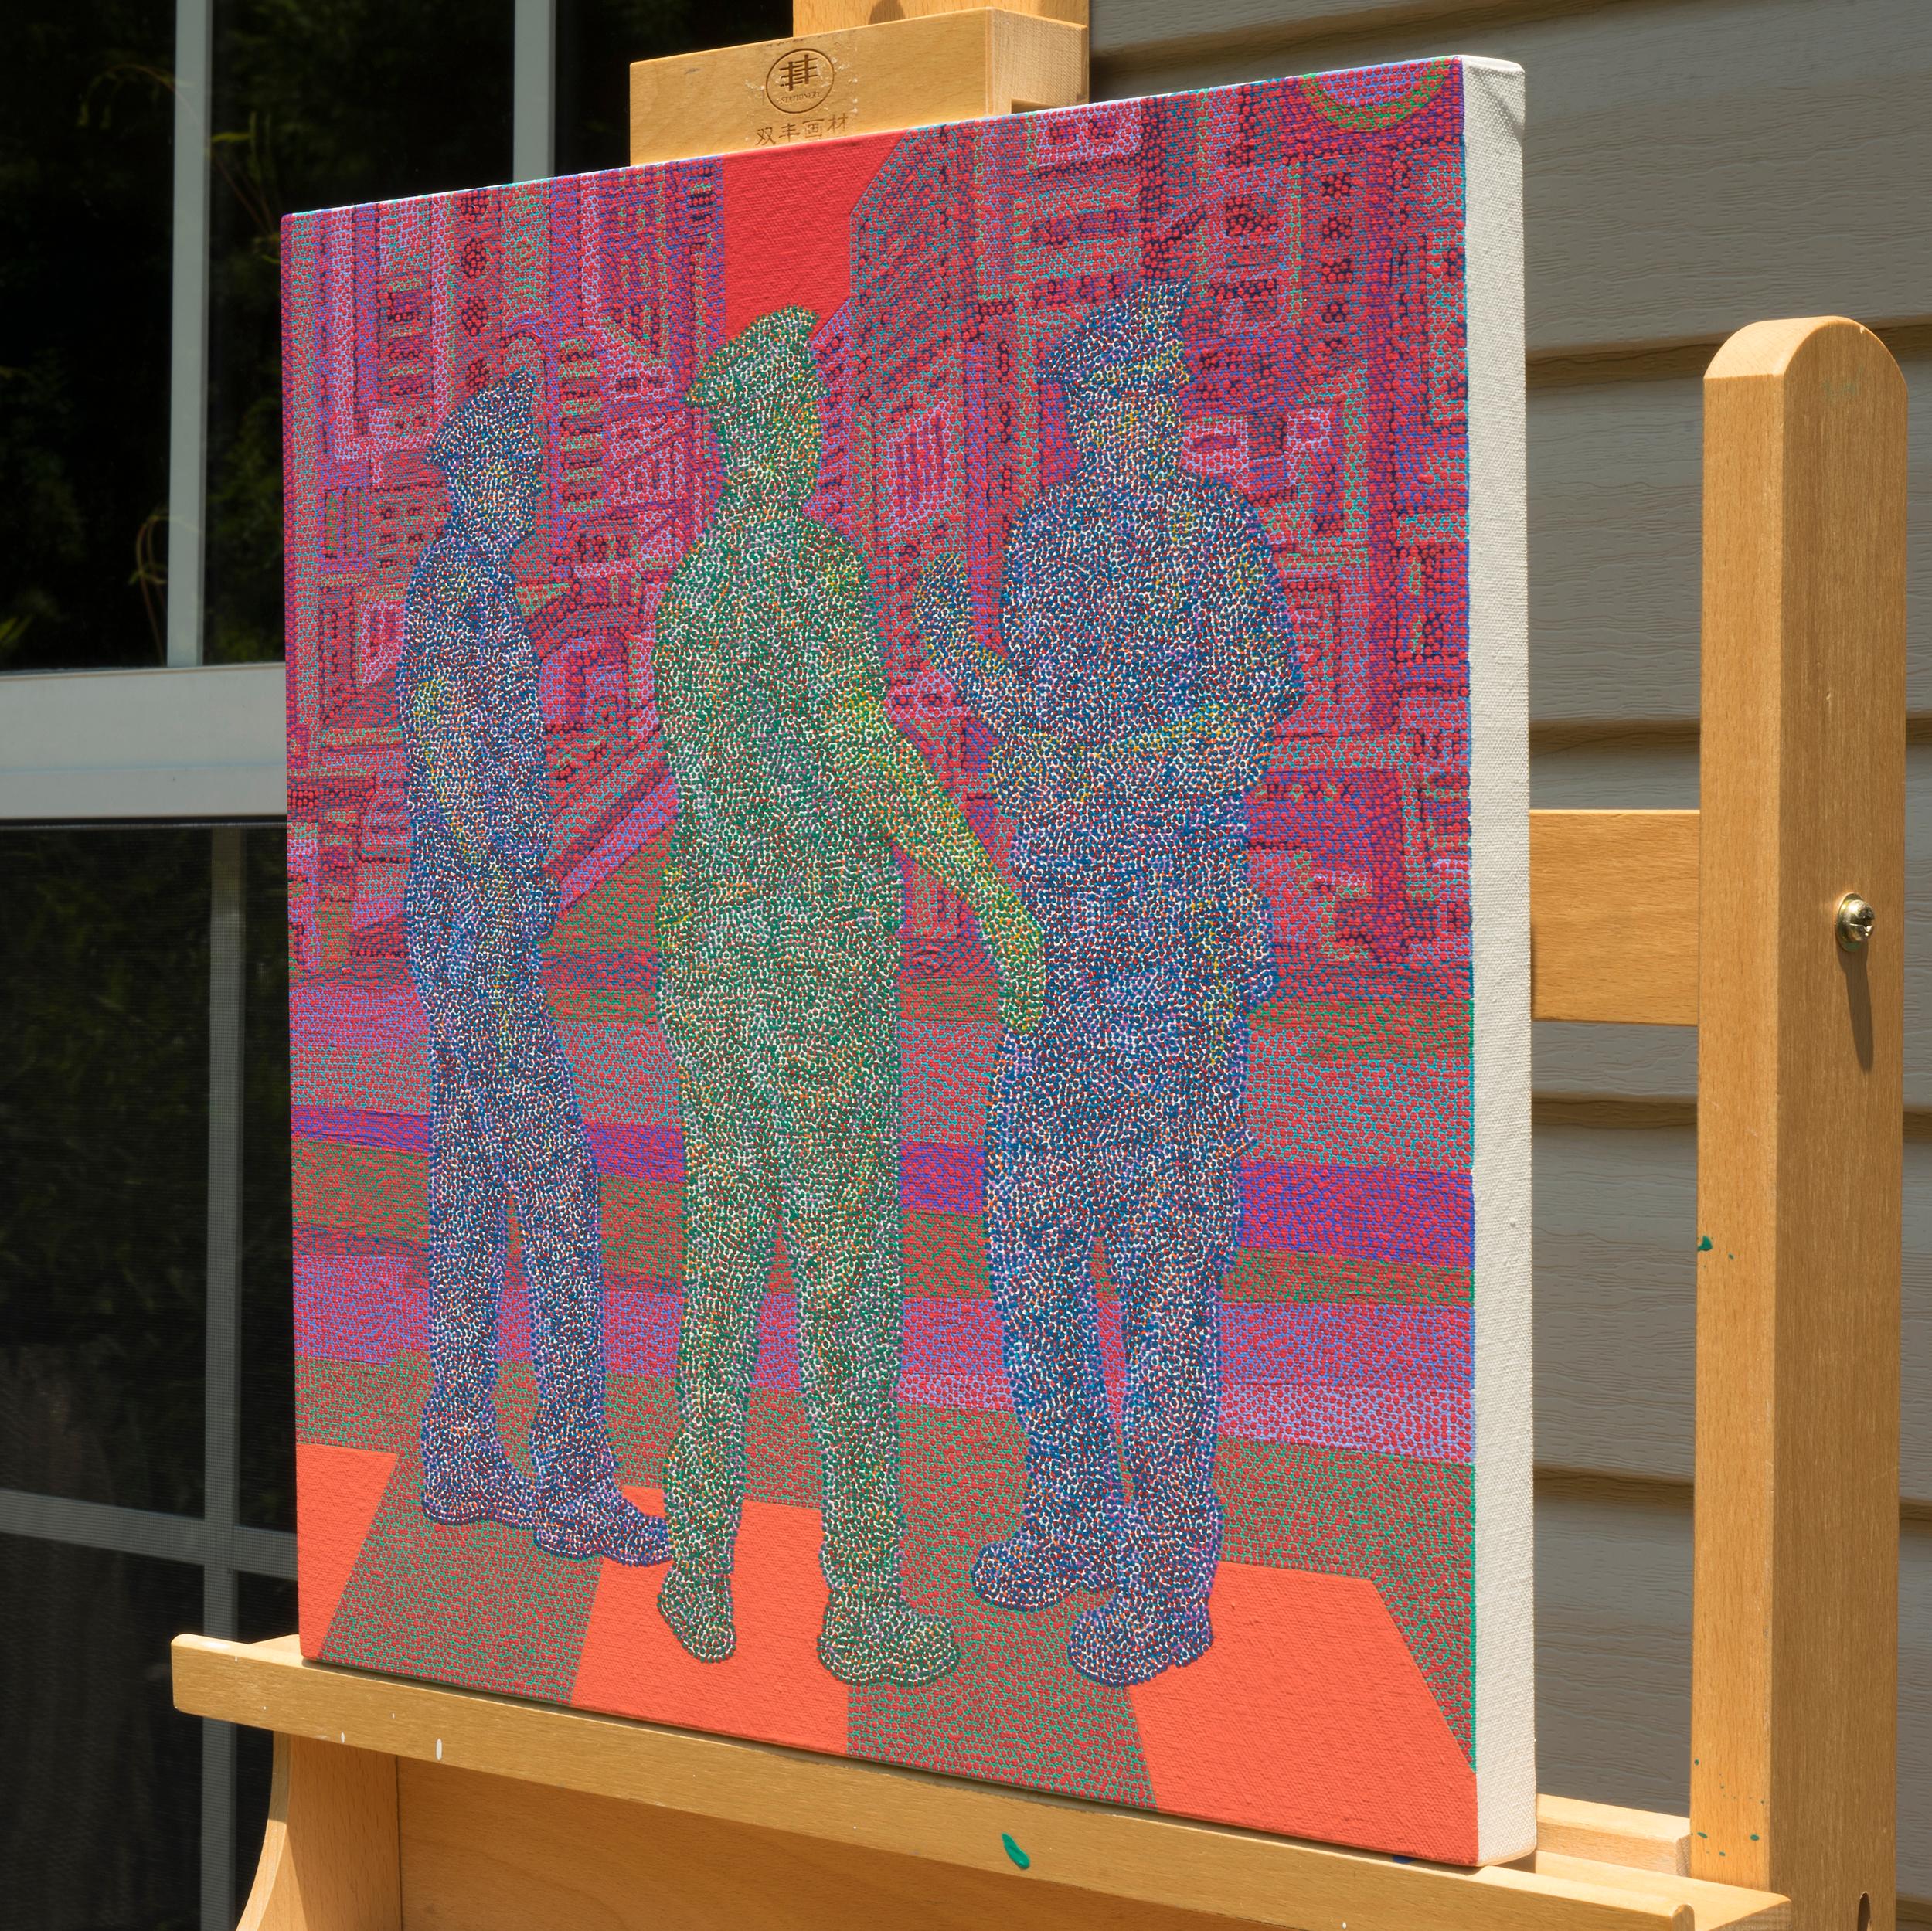 <p>Artist Comments<br>Artist Hyoungseok Kim paints three police officers on the street in New York City with his signature style of pointillism. He emphasizes the material and scientific features of nature by expressing the flow of dots or